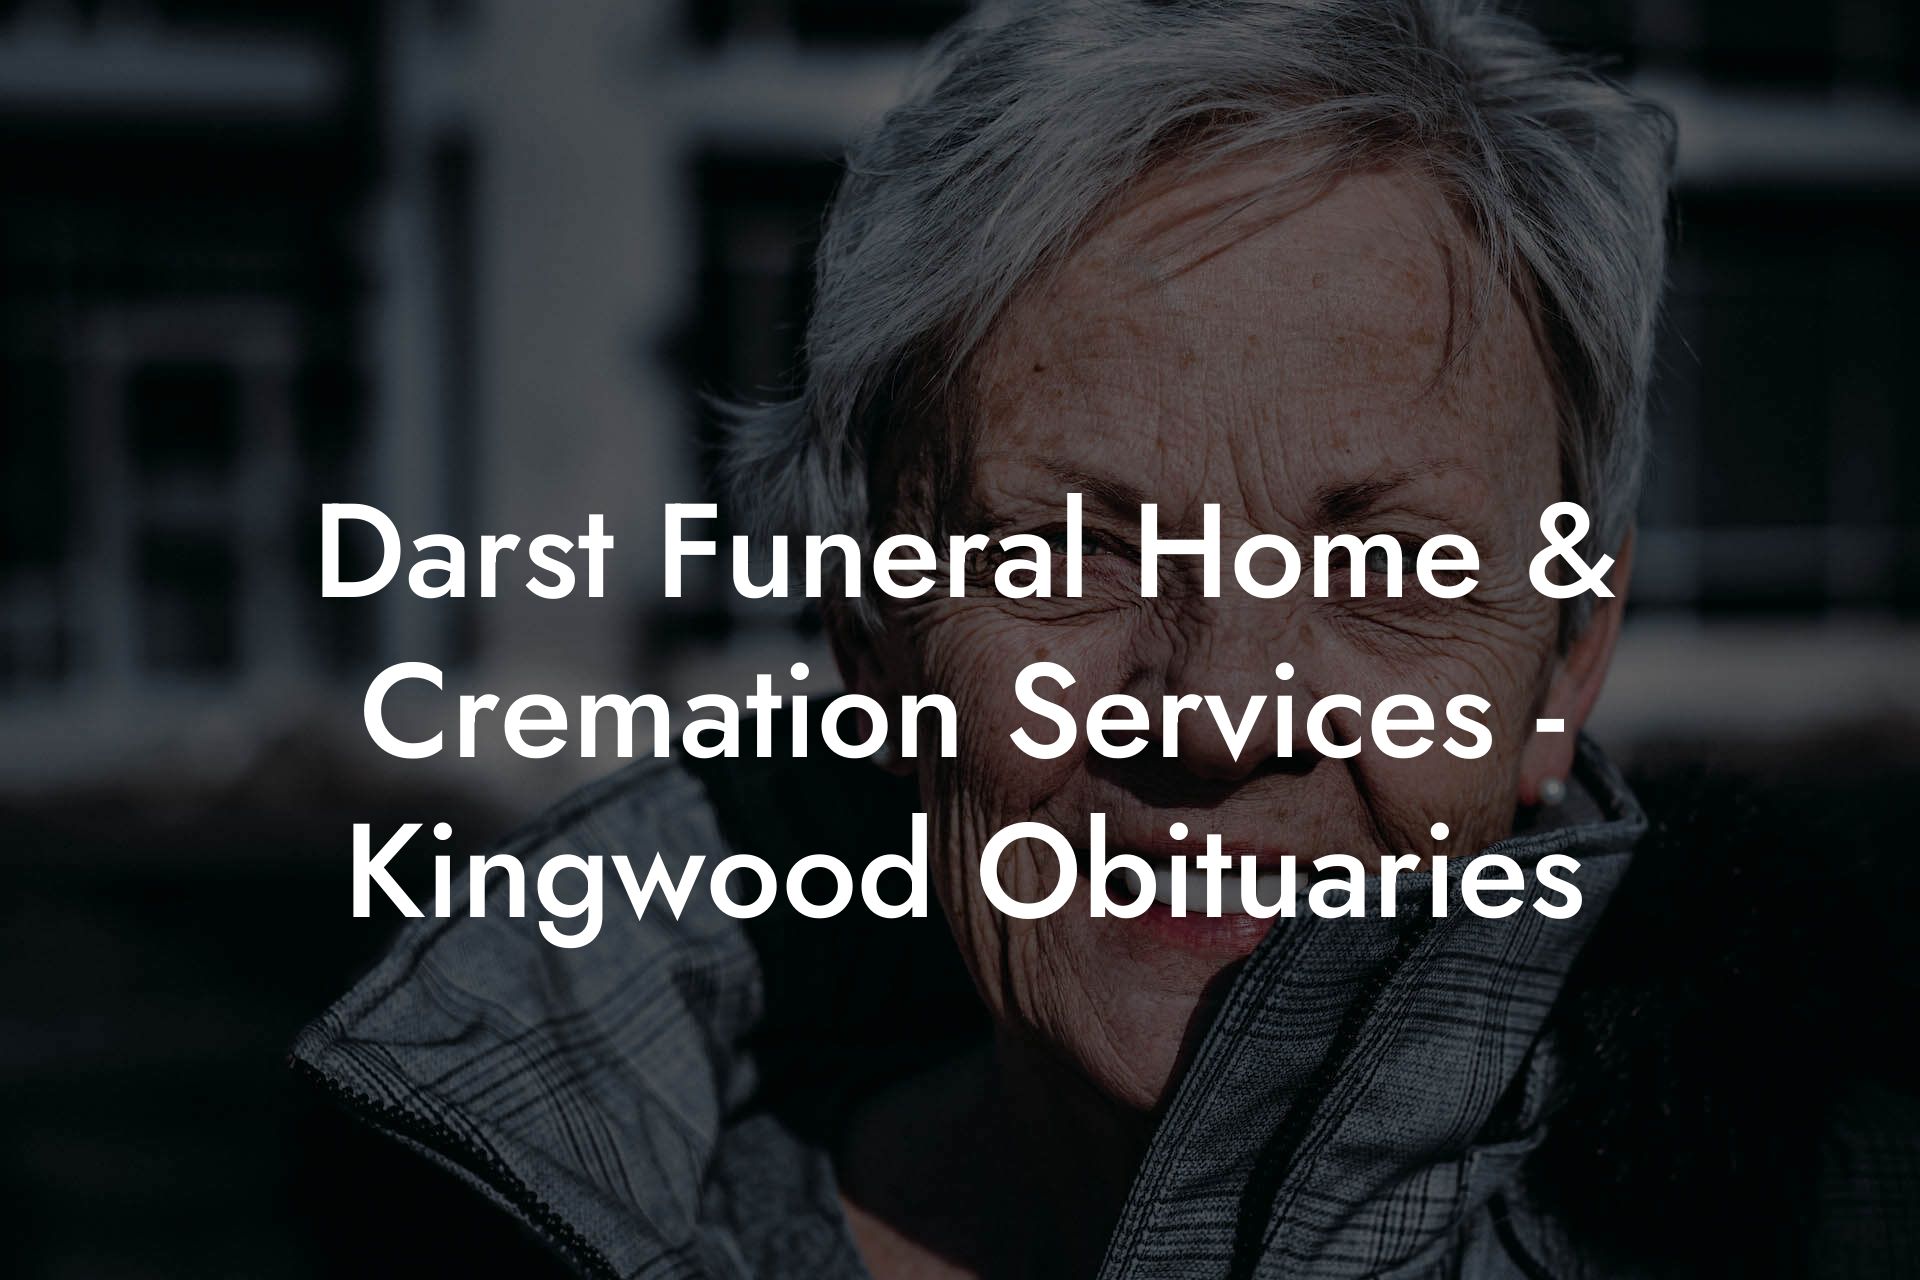 Darst Funeral Home & Cremation Services - Kingwood Obituaries